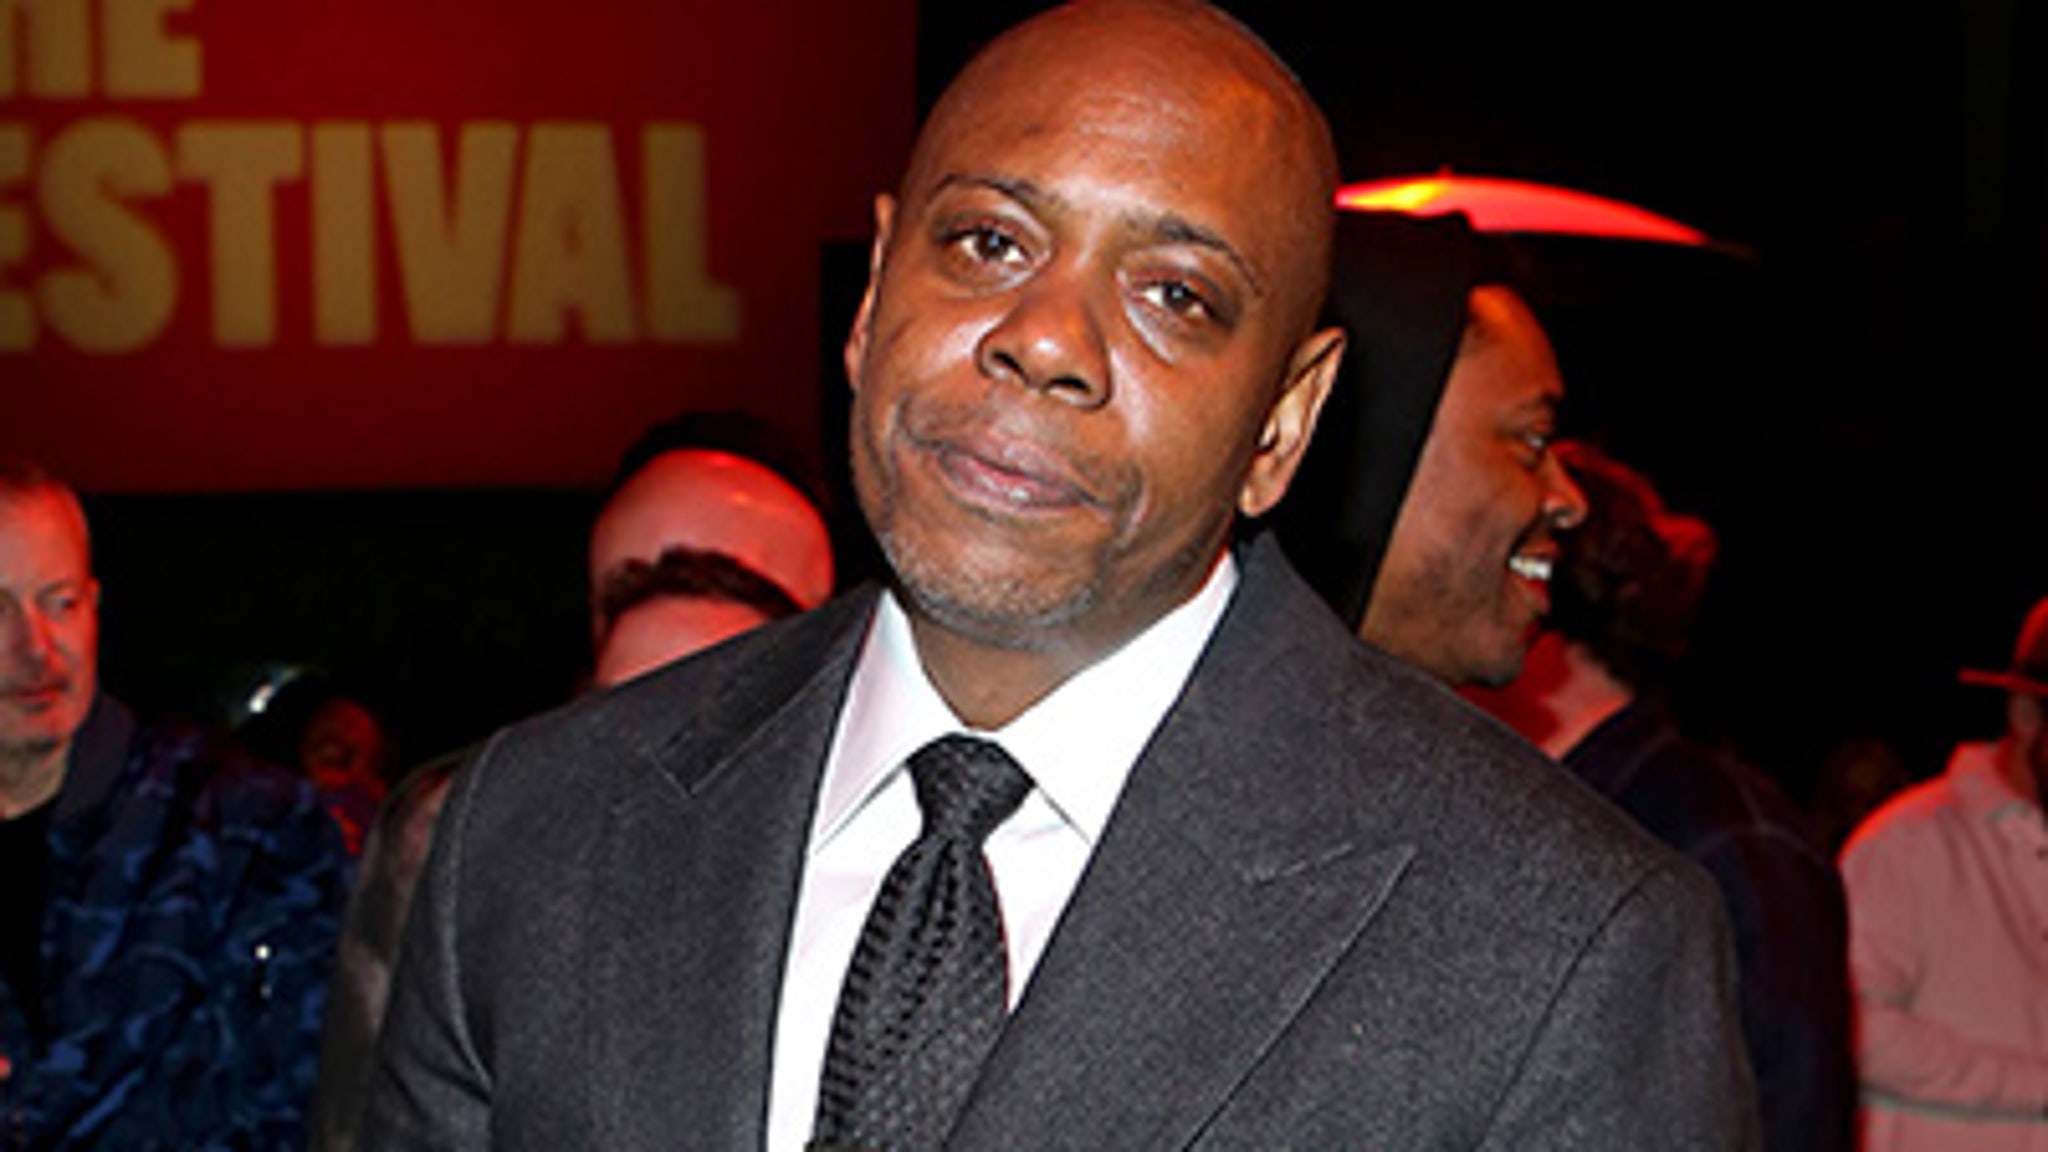 dave-chappelle-tackled-slammed-on-stage-at-hollywood-bowl-by-man-with